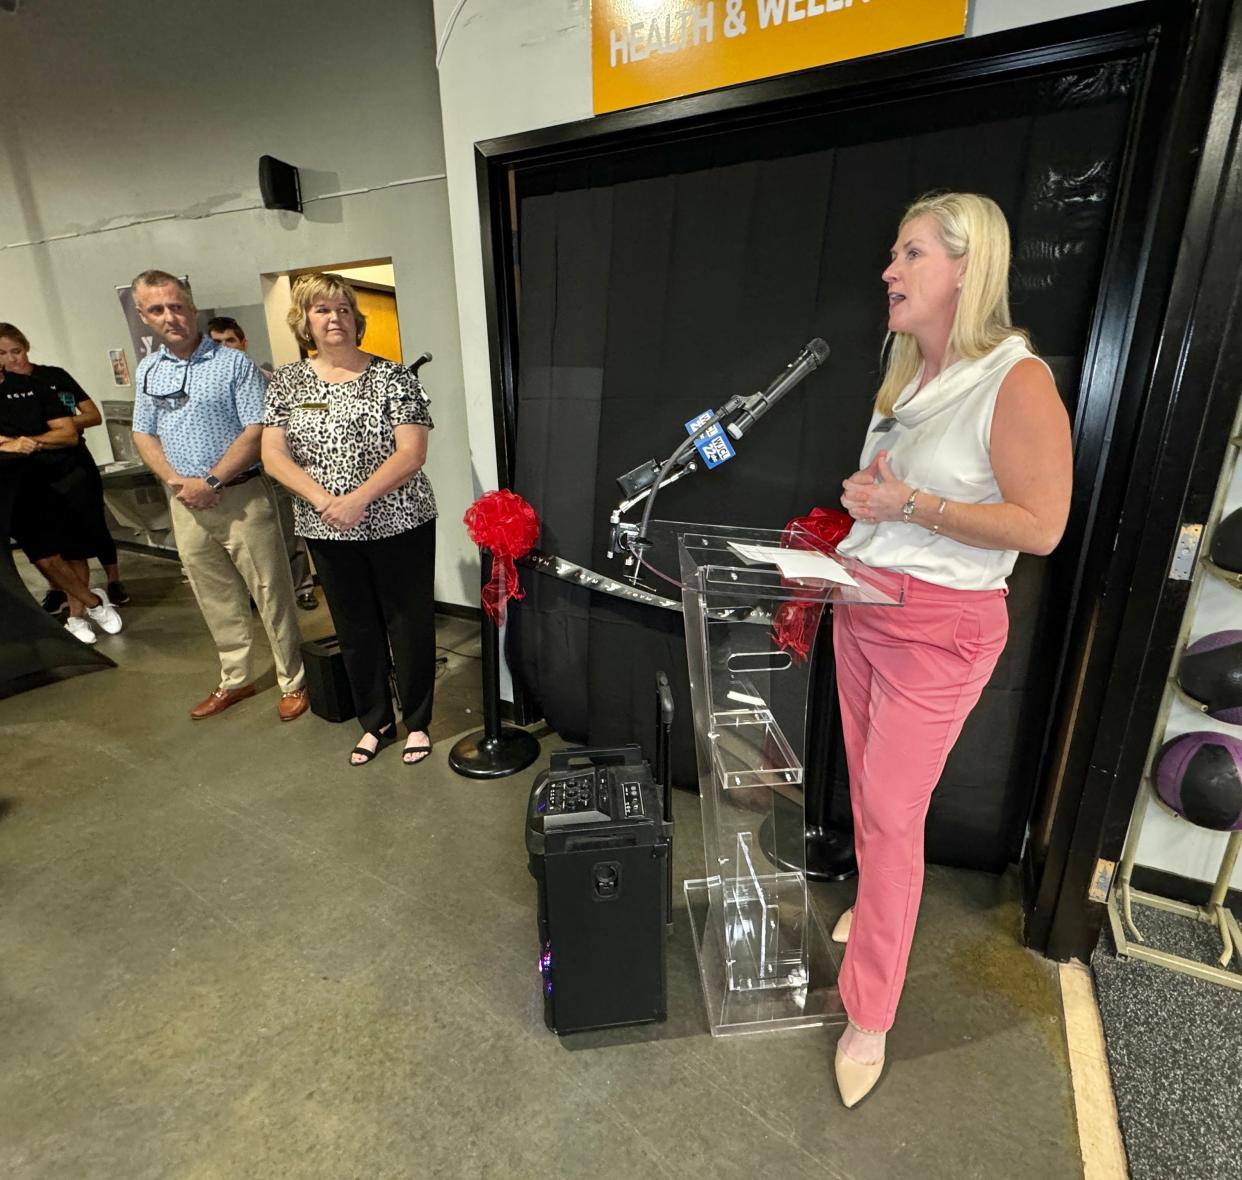 Summer Beal, president of the Richmond Hill Chamber of Commerce, speaks before a crowd during the ribbon cutting ceremony for the EGYM technology at the Richmond Hill YMCA.